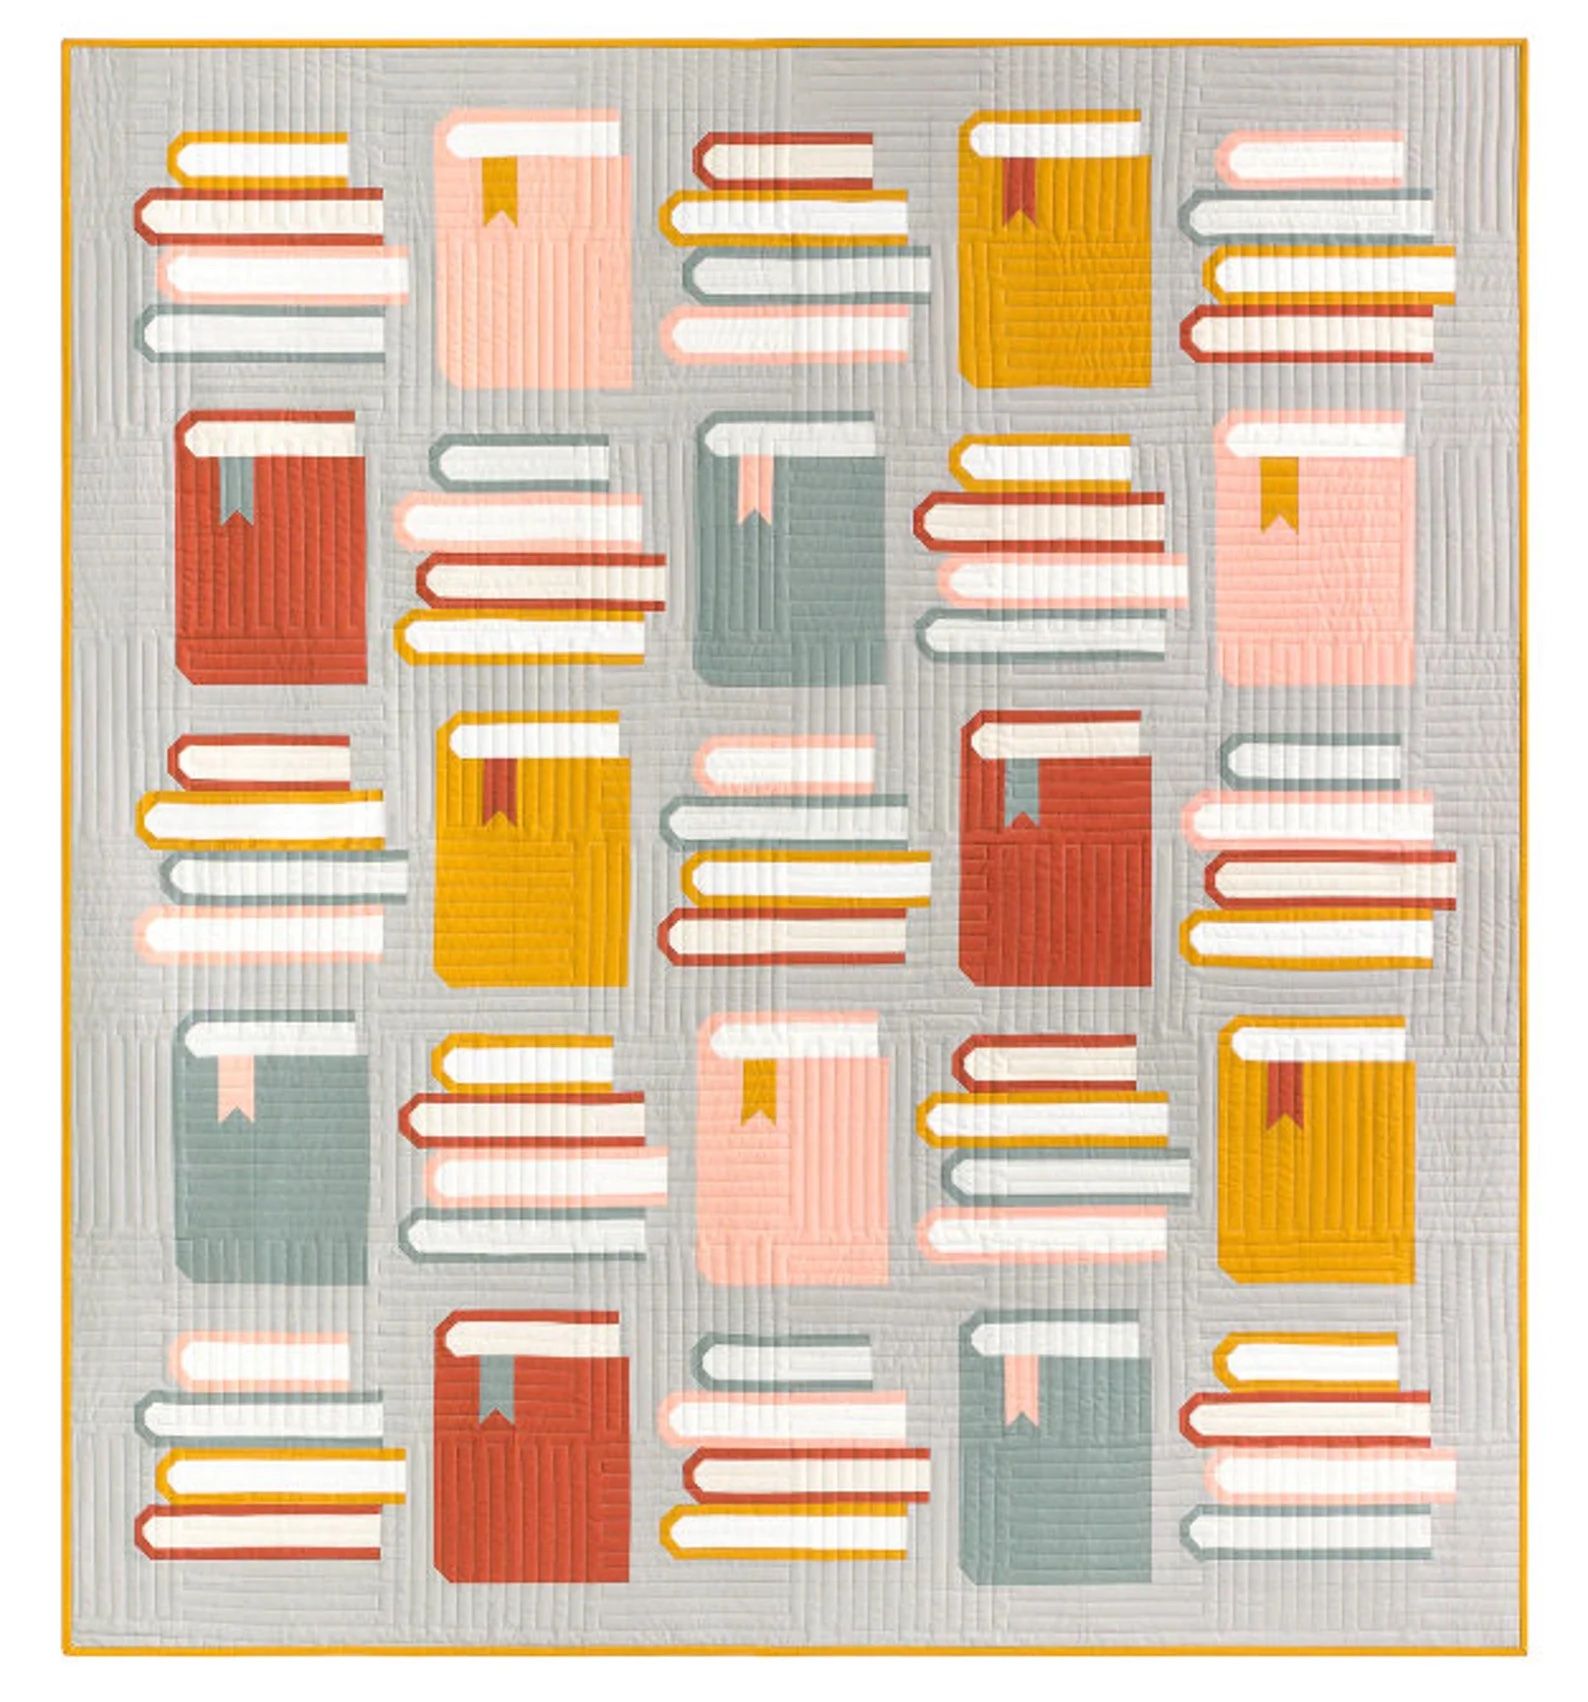 quilt made to look like alternating stacks of books and book covers